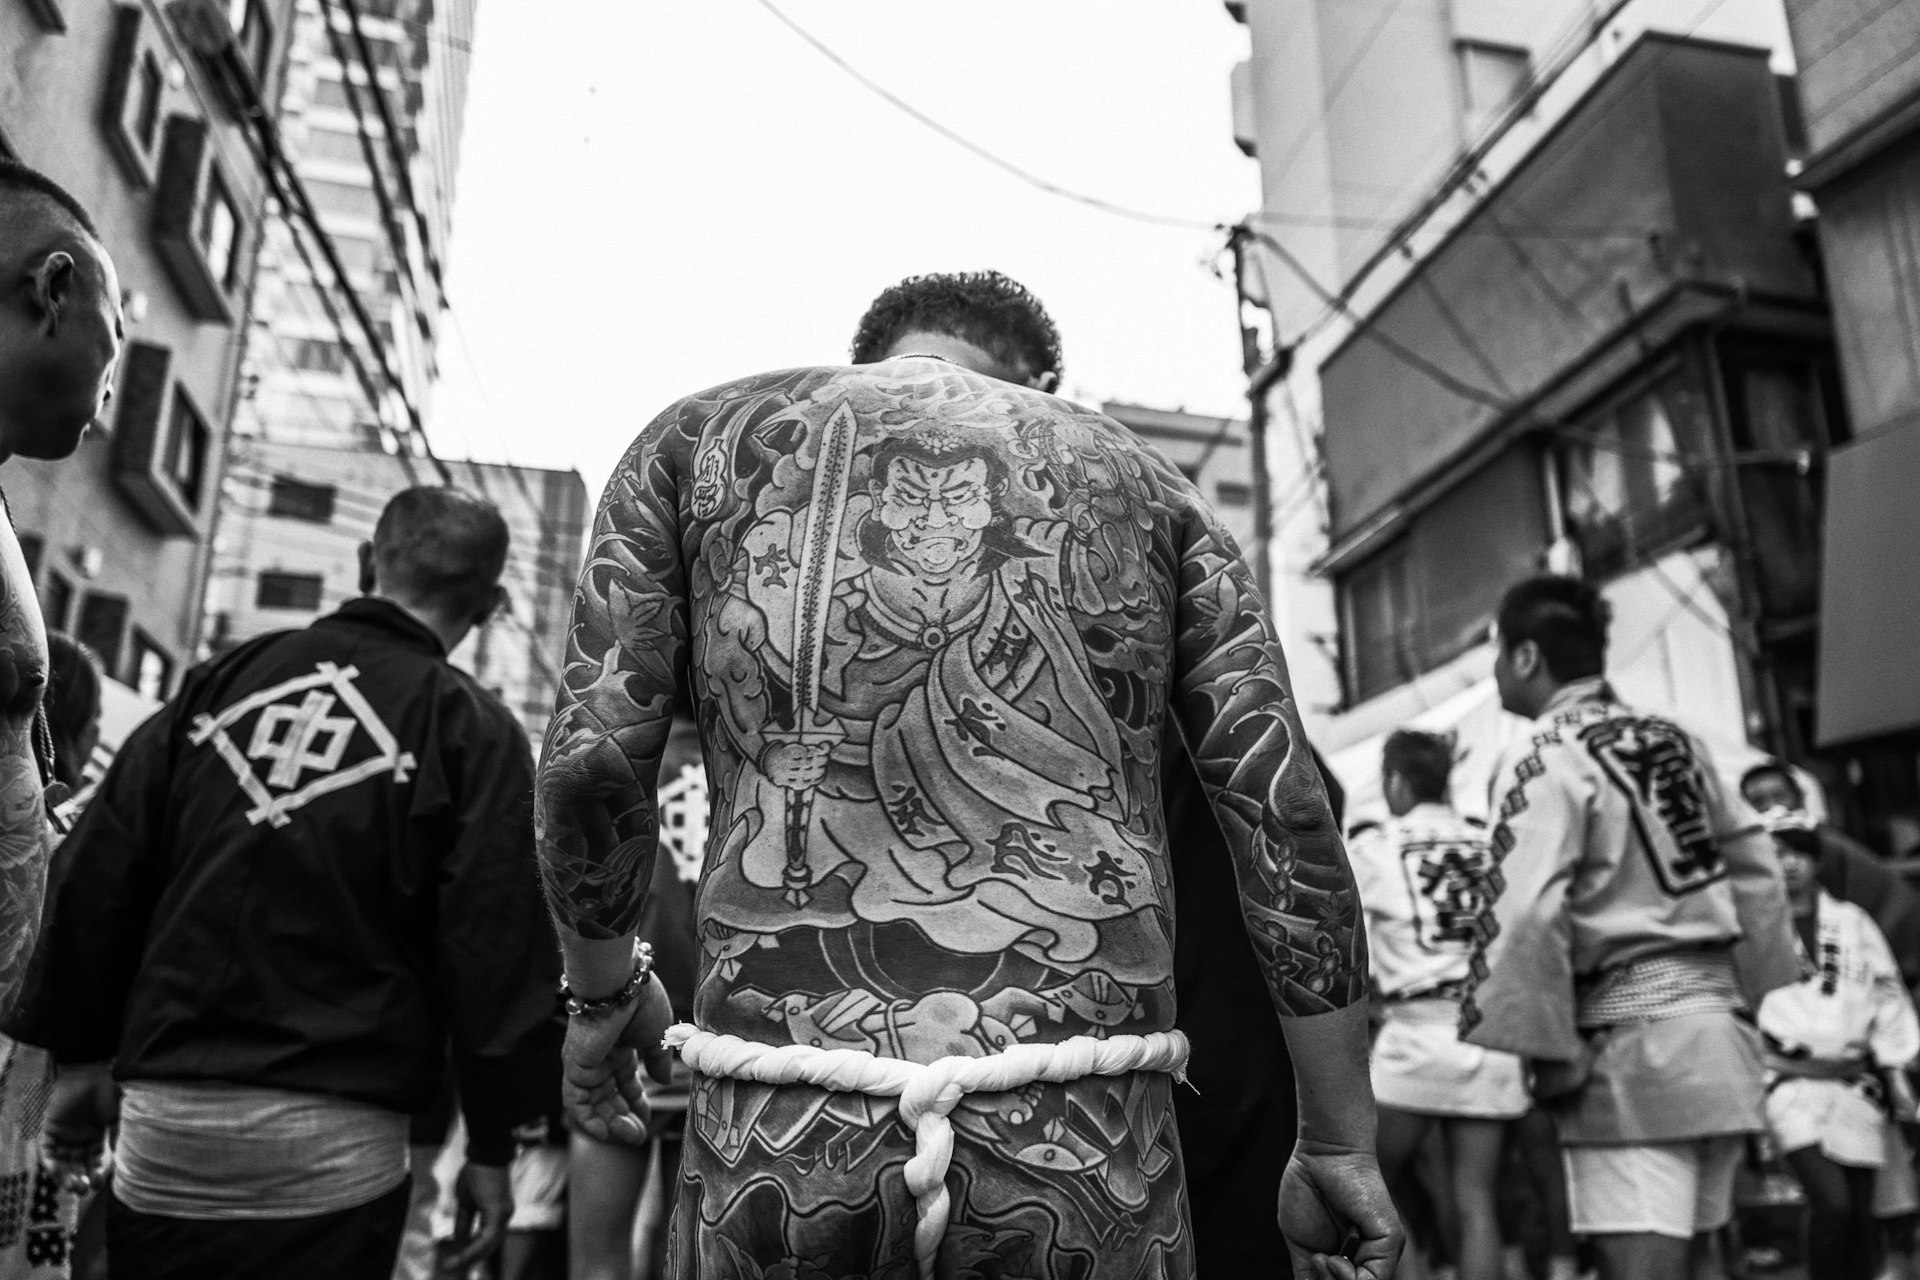 An outsider’s take on 21st century Japan